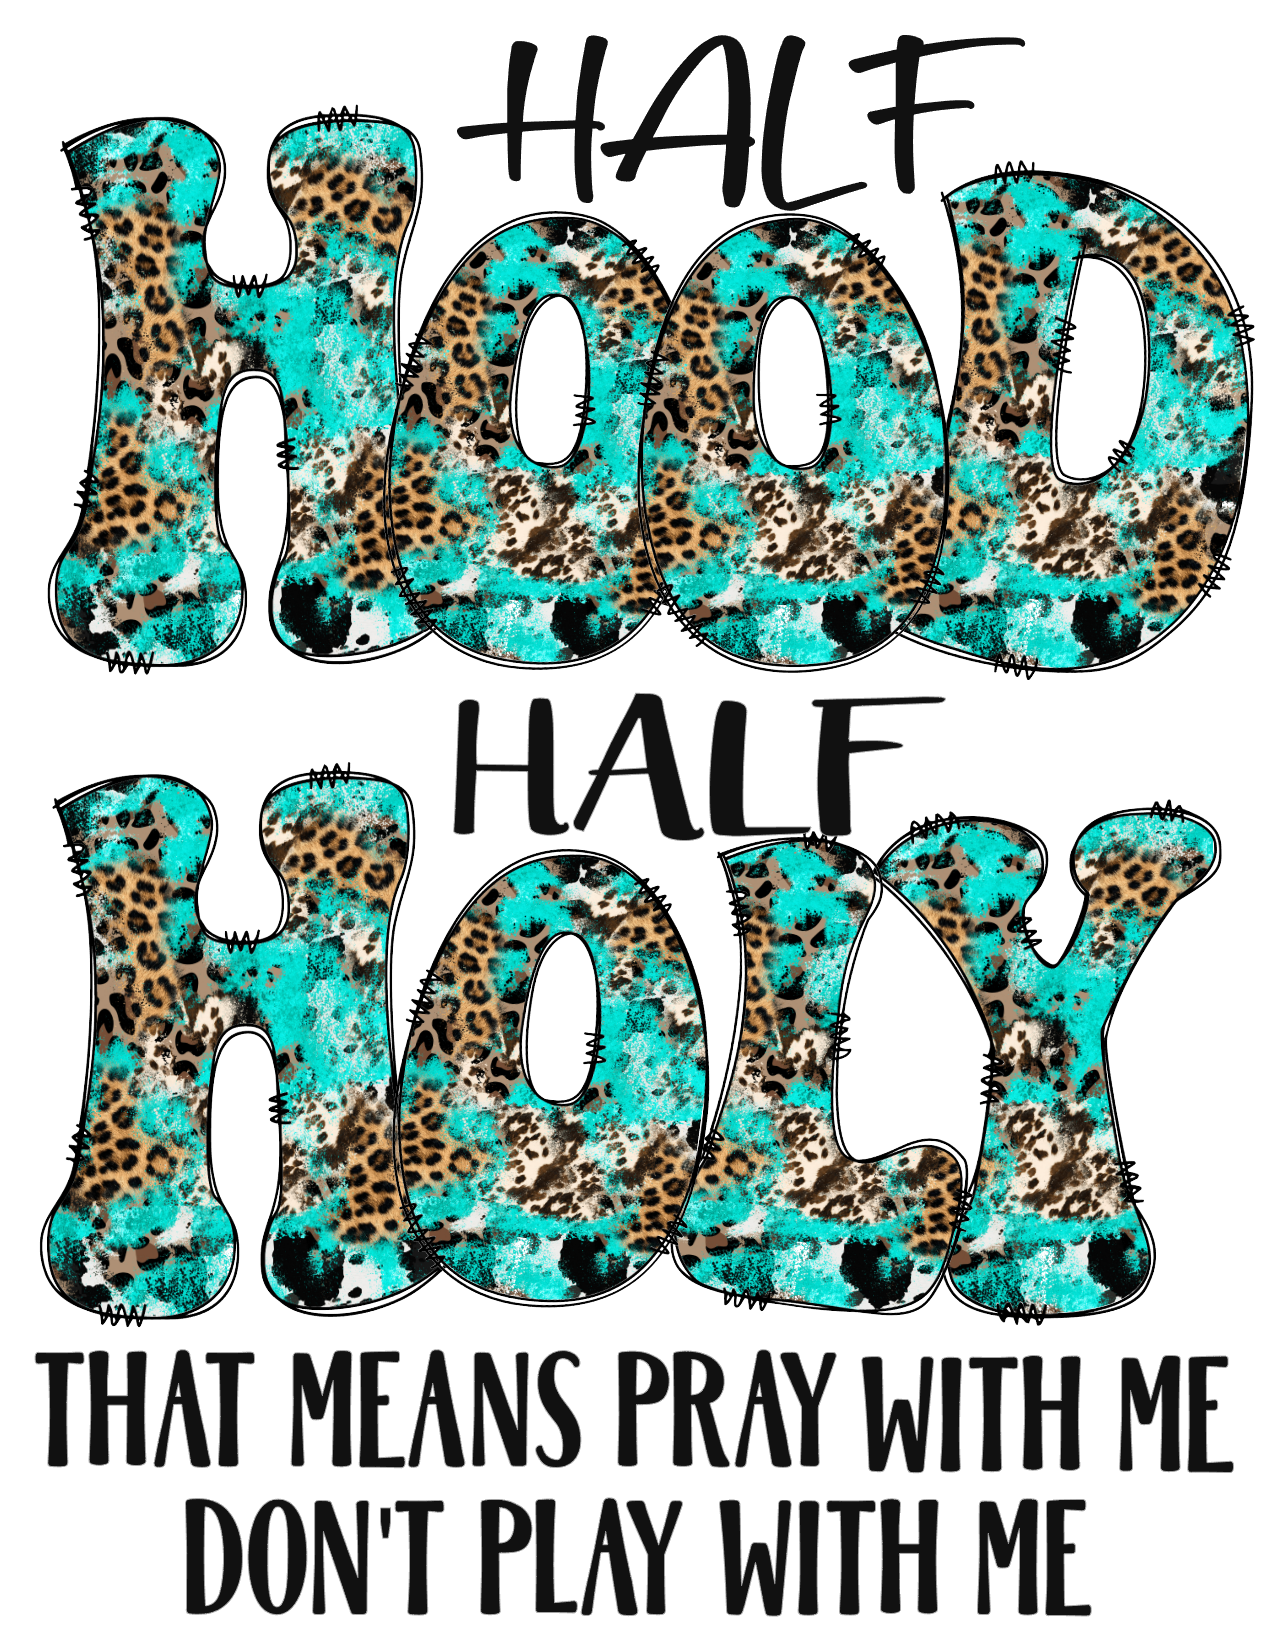 #397 Half Hood Half Holy That means pray with me don't play with me